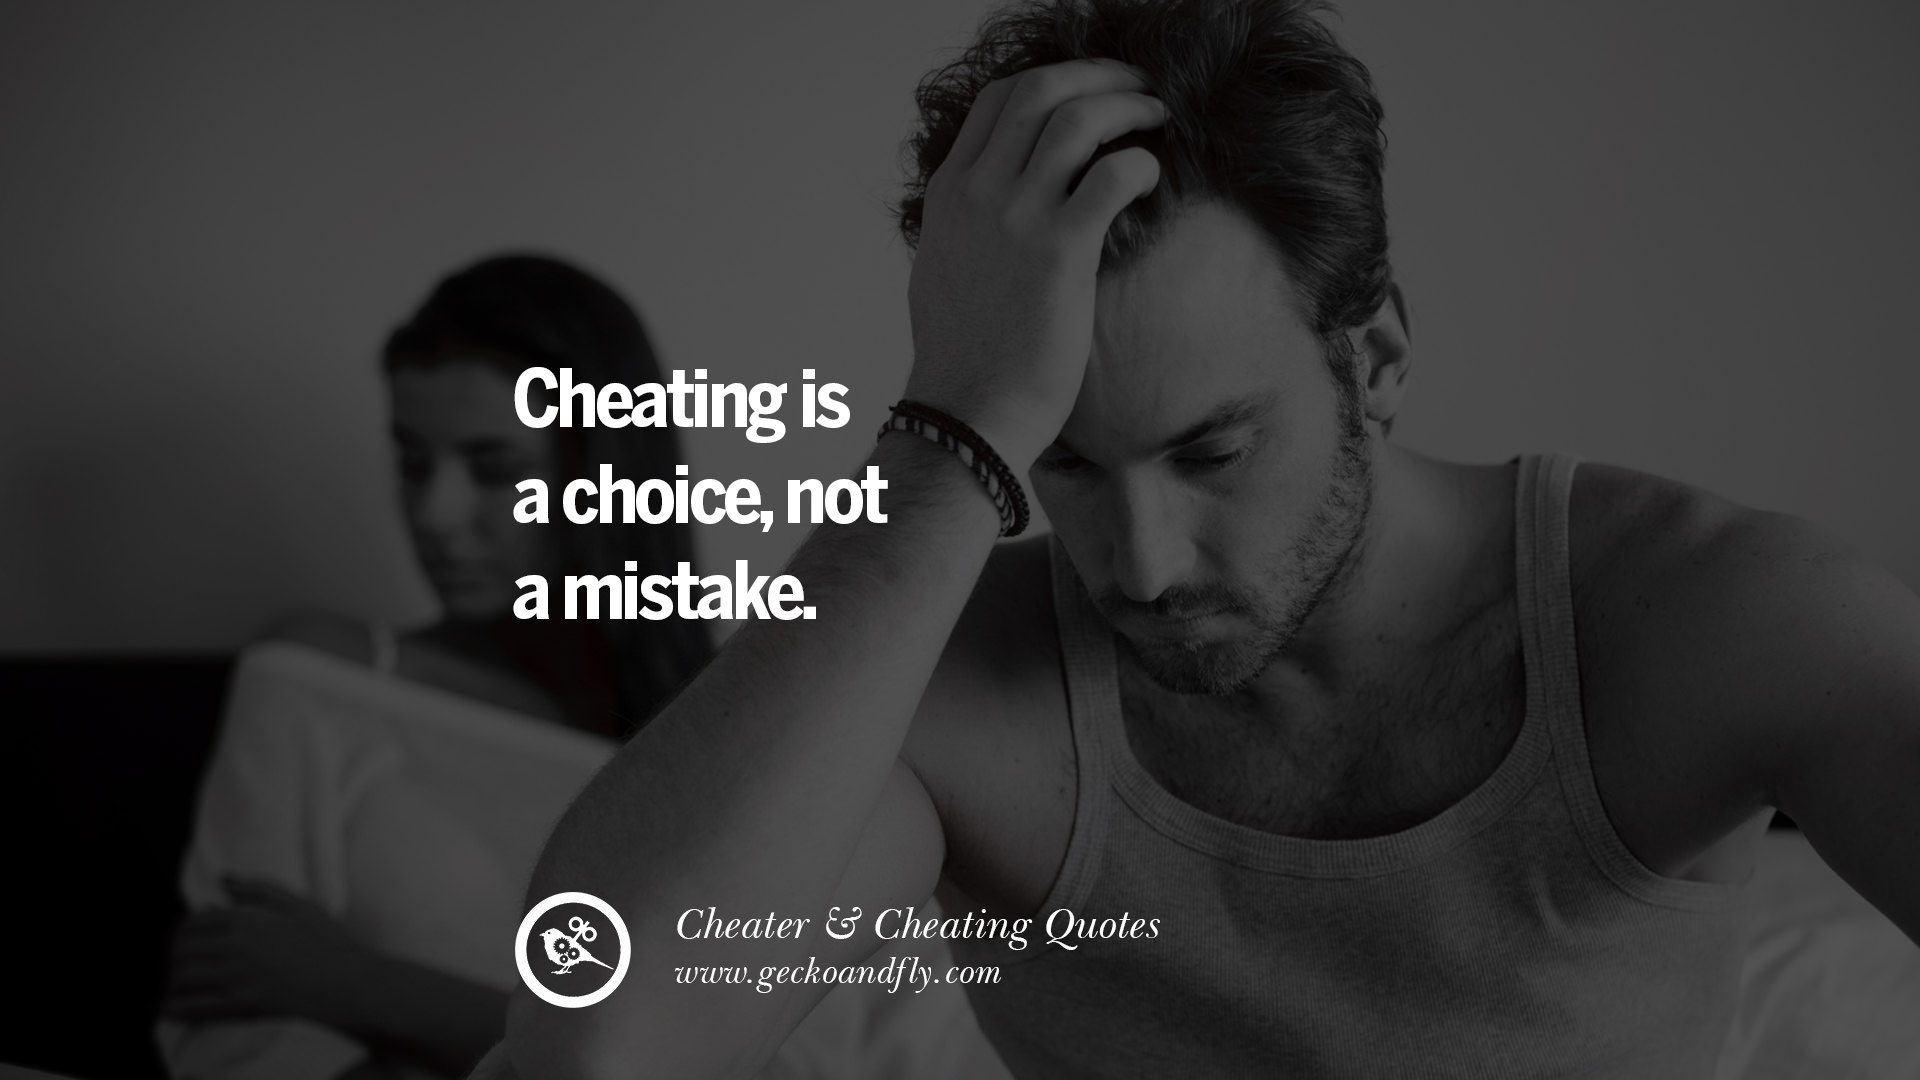 Cheating Quotes - Homecare24